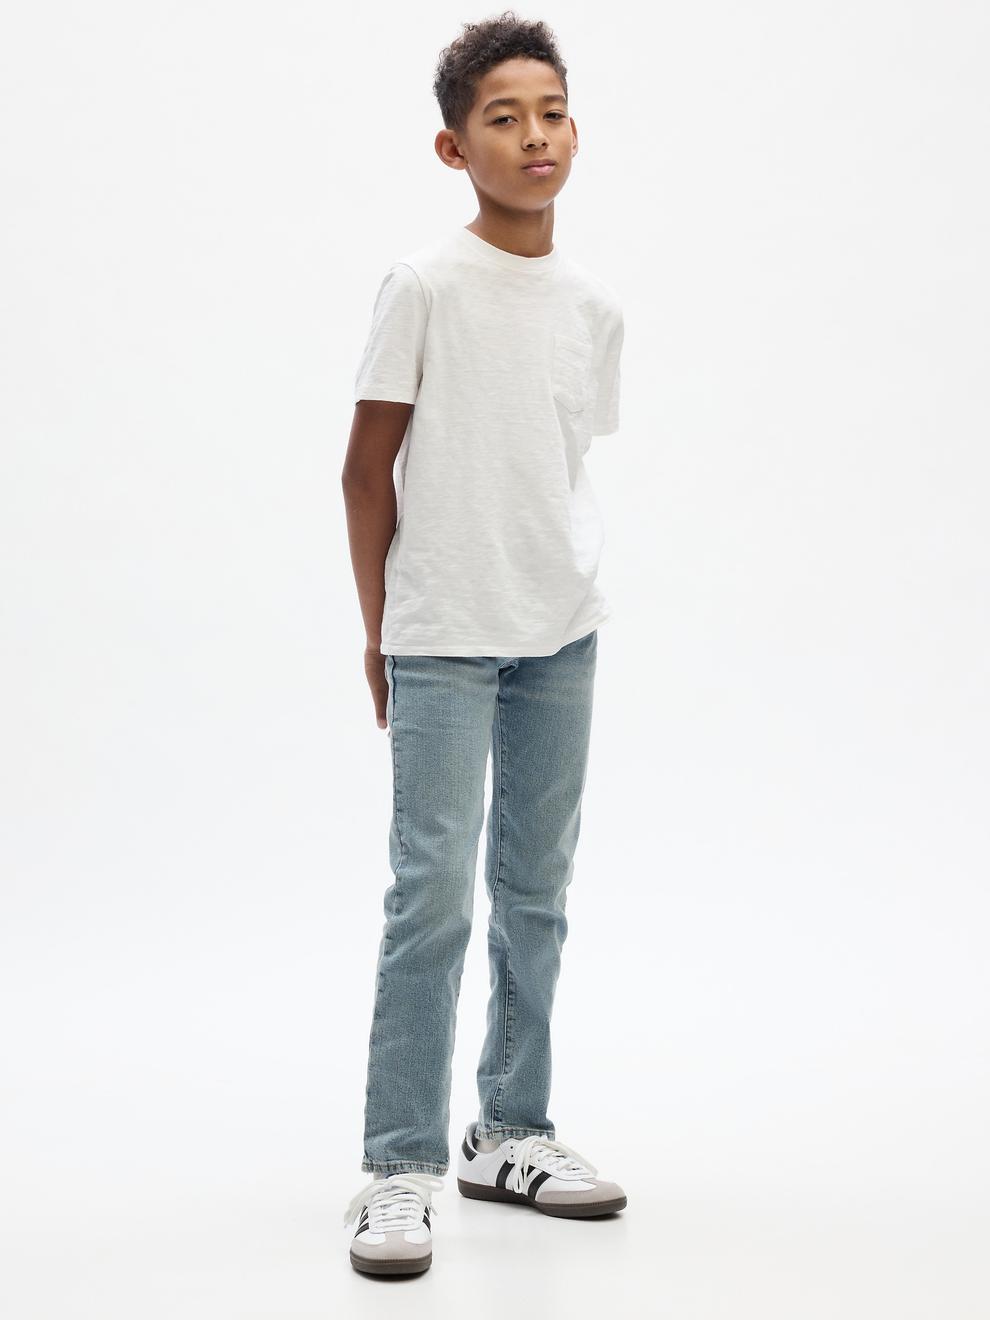 Kids Slim Jeans offers at 125 Dhs in Gap